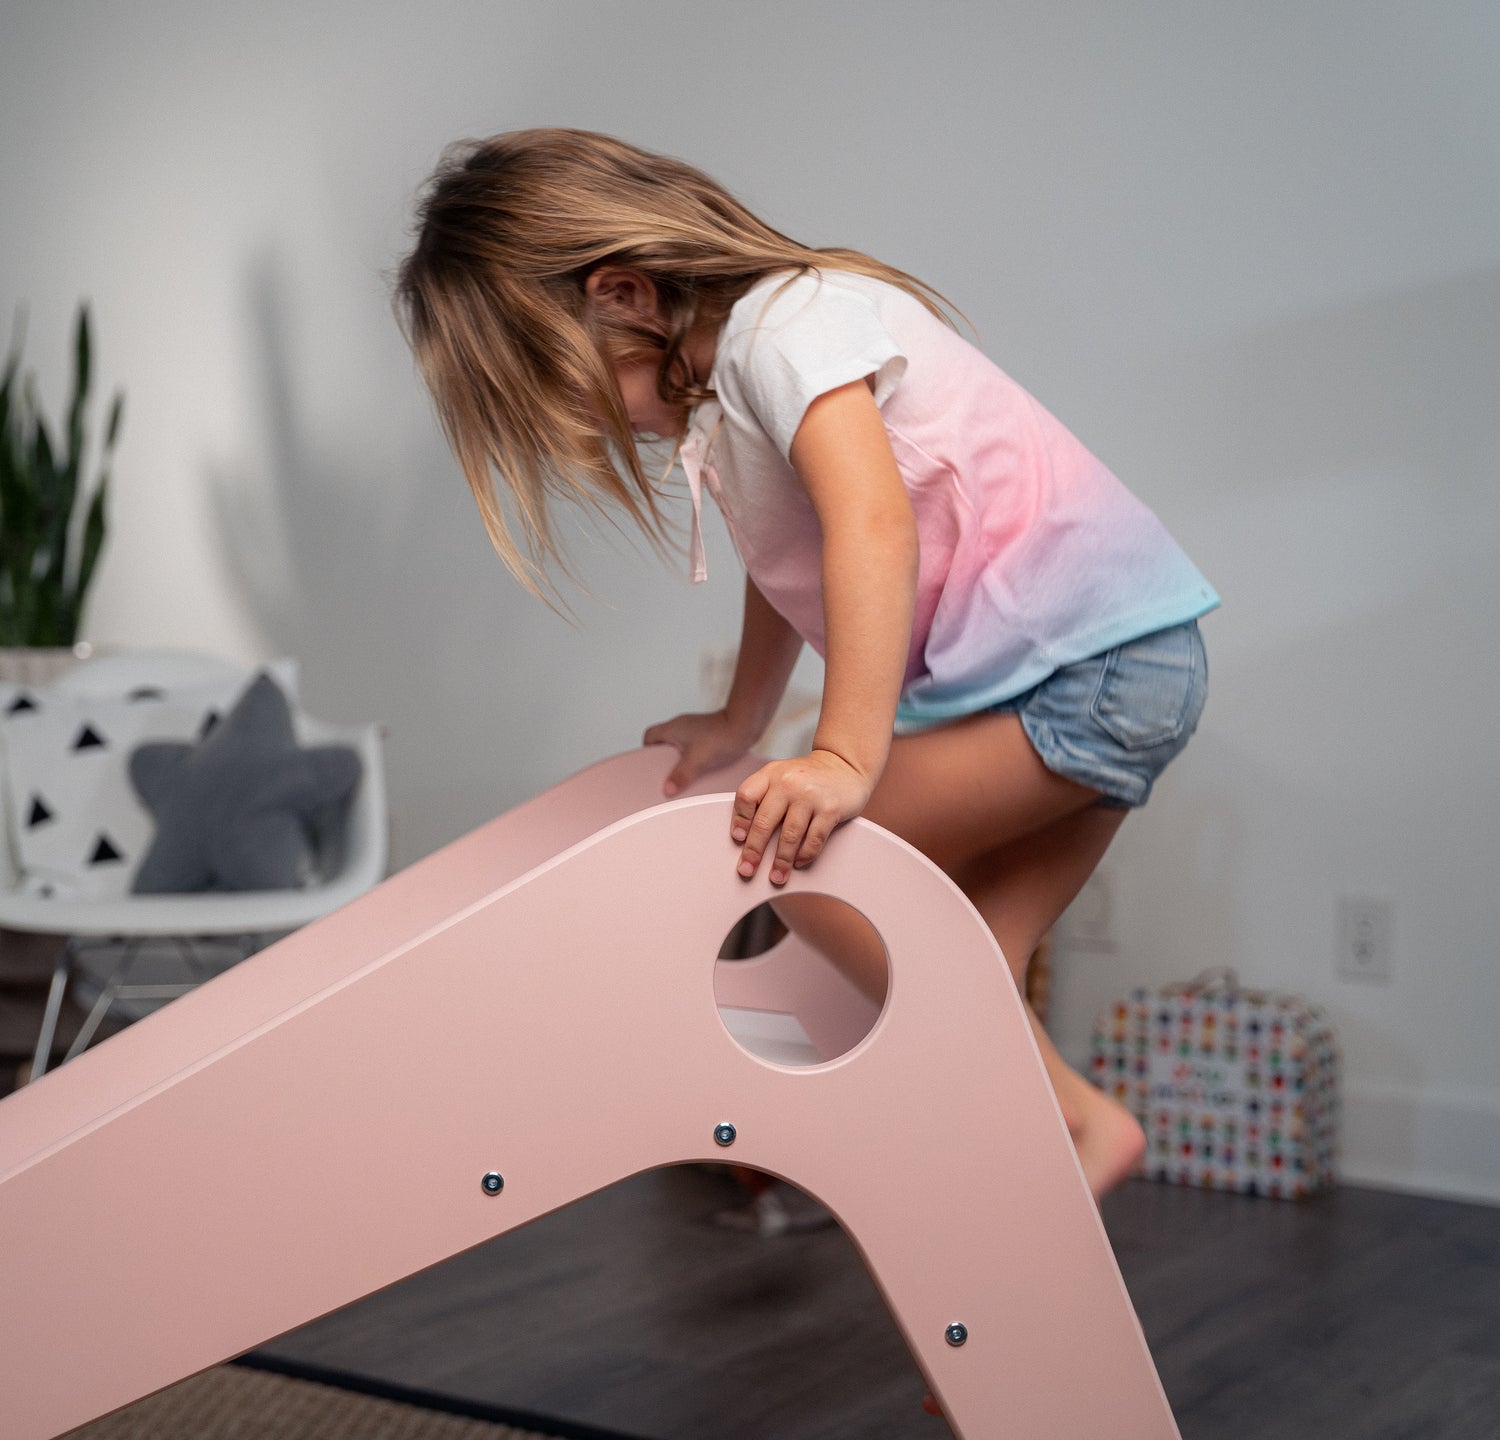 Girl Climbing Up Manuka - Avenlur's Safe and Fun Indoor Toddler Slide in Playroom. Shown in Pink.